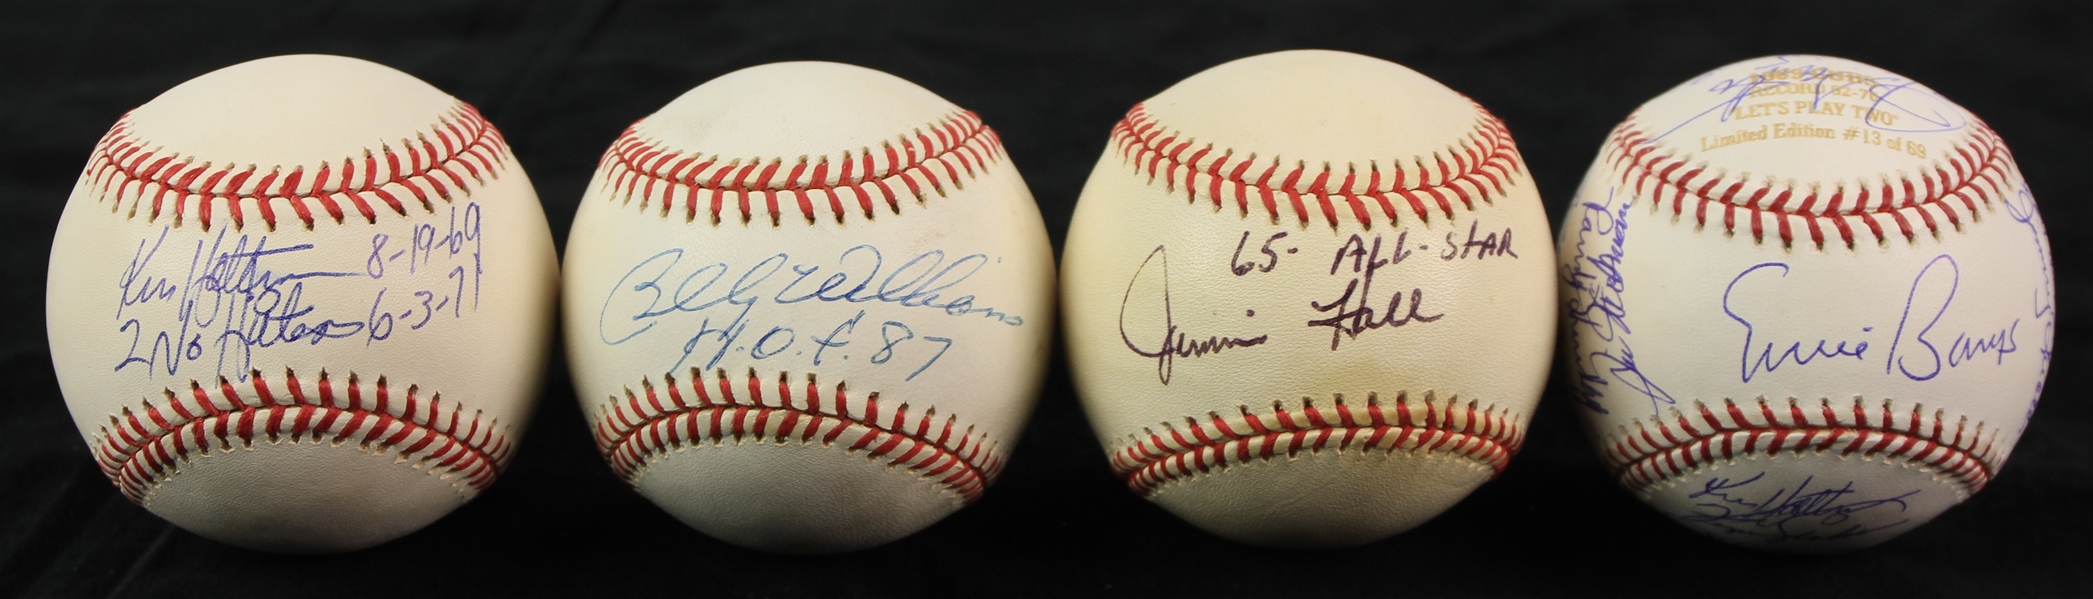 1980s-2000s Chicago Cubs Signed Baseballs - Lot of 4 w/ 1969 Team Signed, Billy Williams, Ken Holtzman & Jimmie Hall